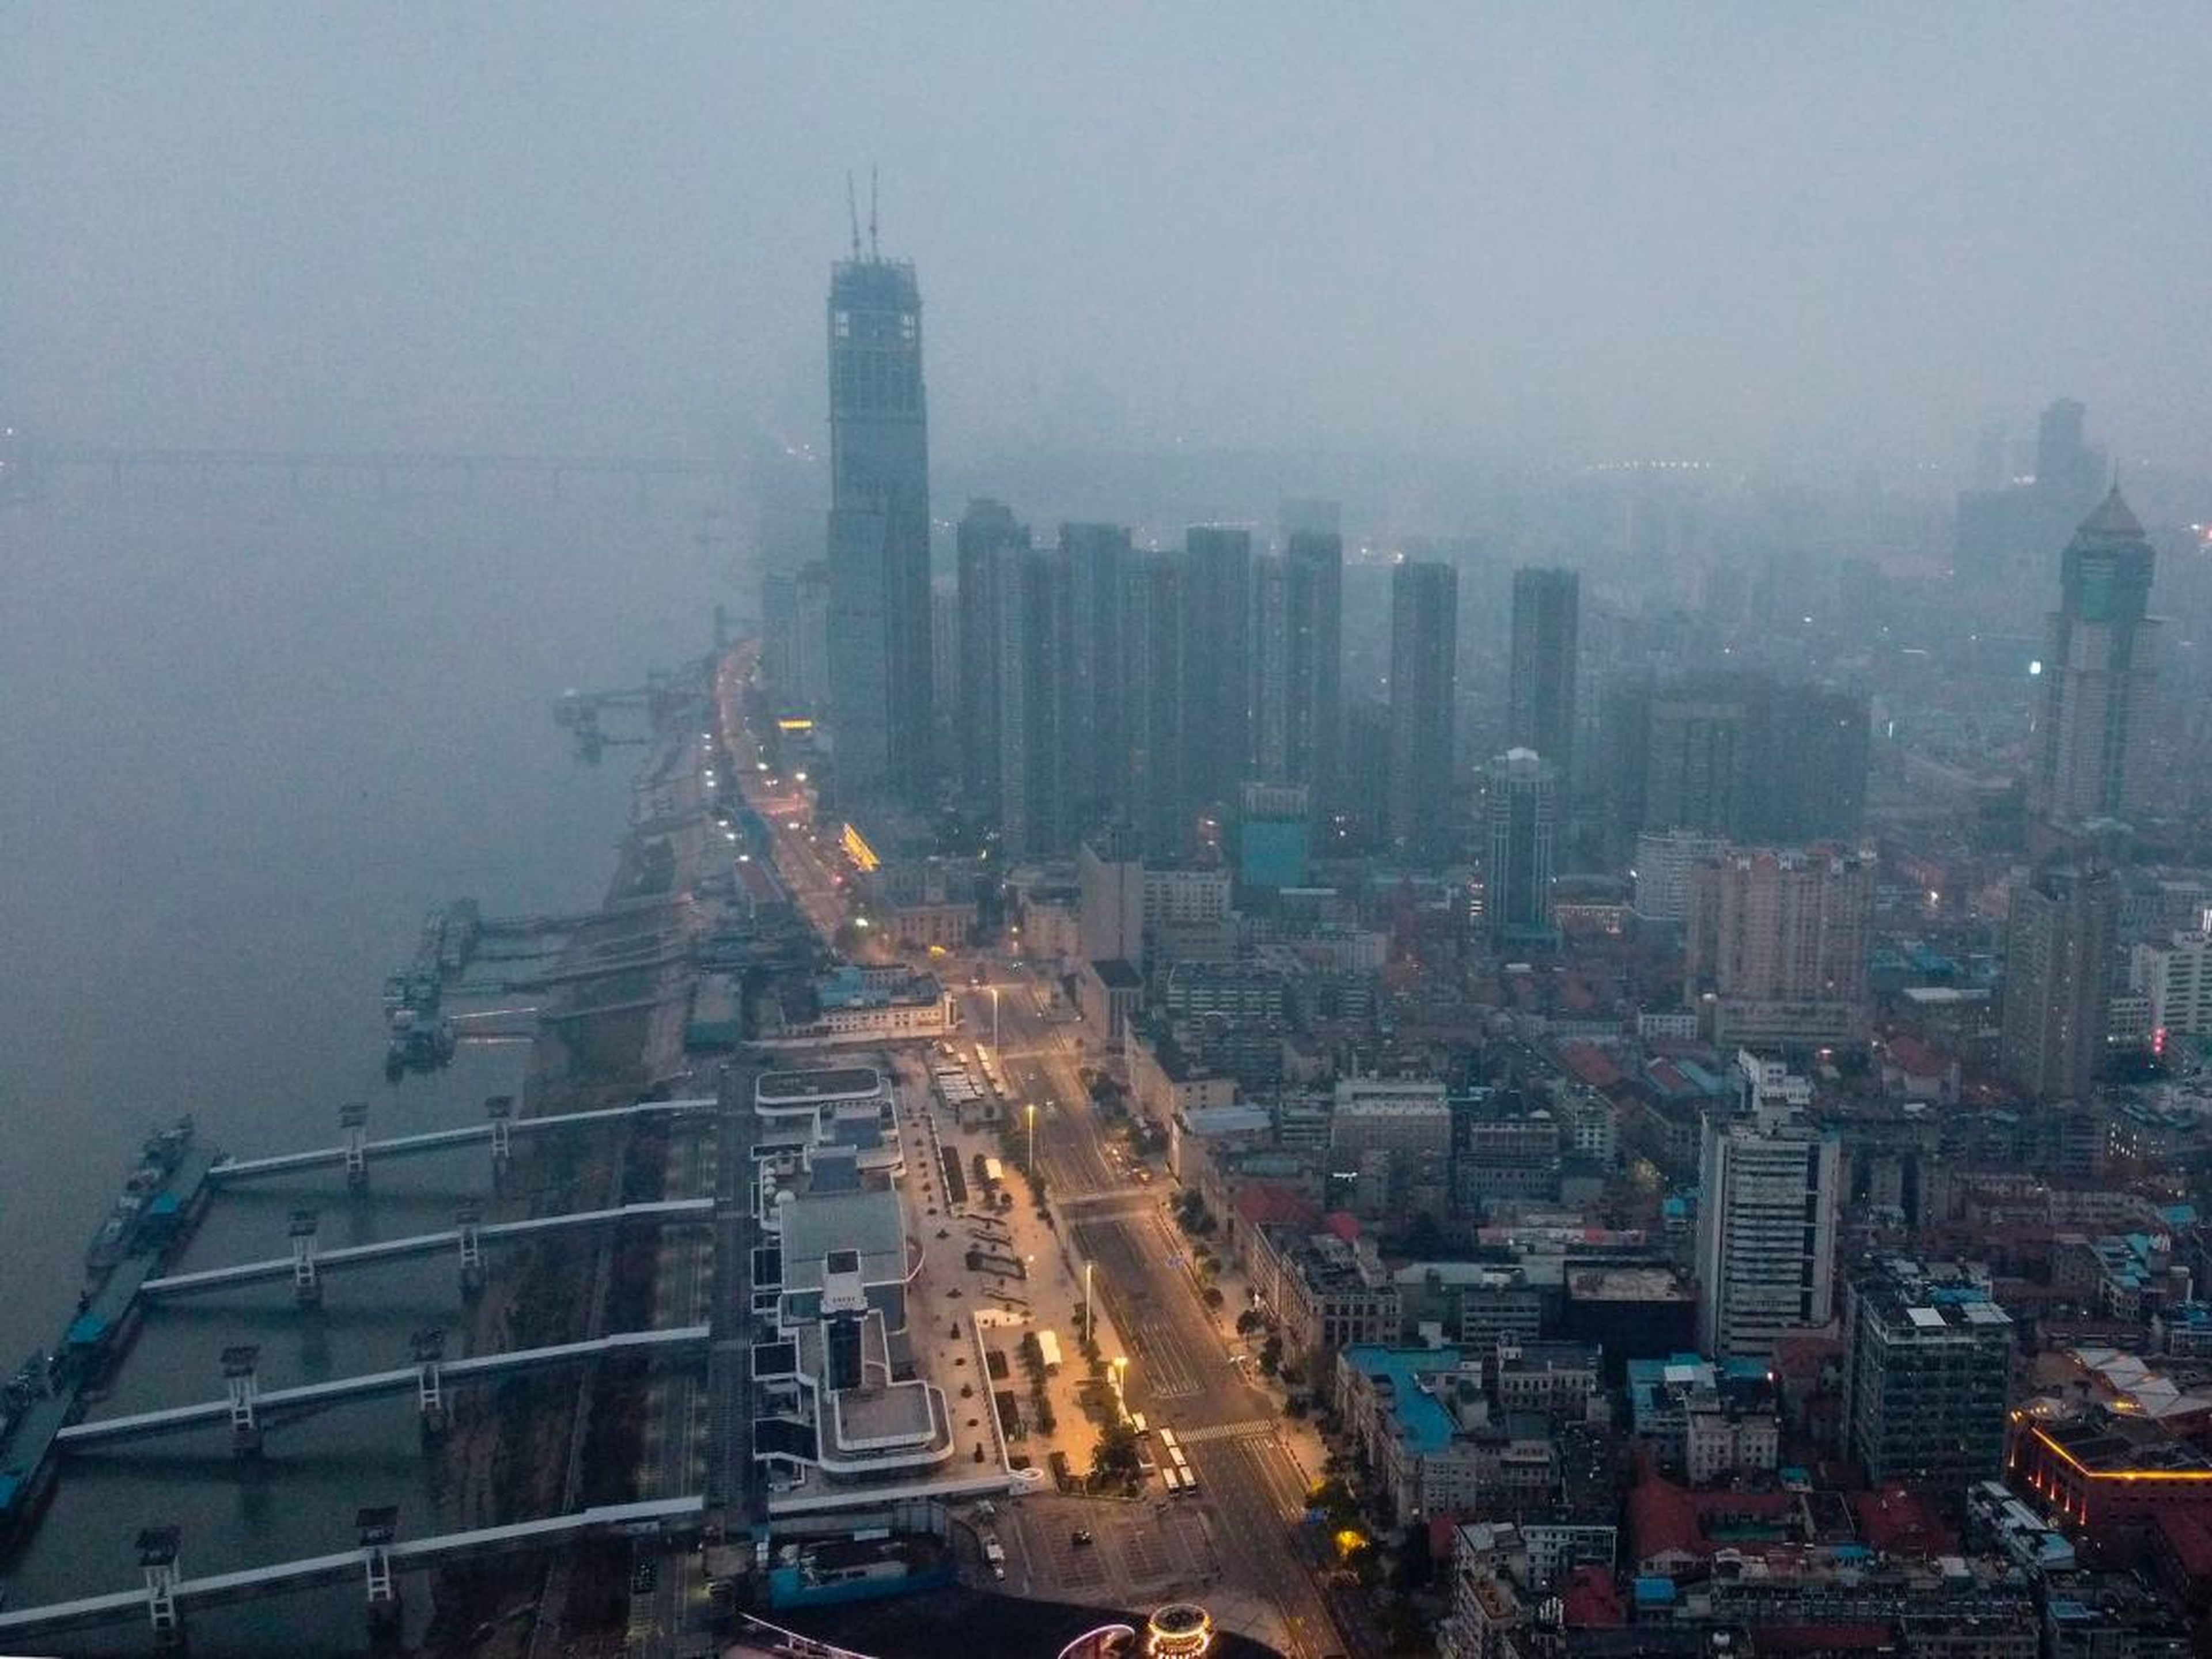 An aerial view shows residential and commercial buildings of Wuhan in China's central Hubei province on January 27, 2020, amid a deadly virus outbreak which began in the city.